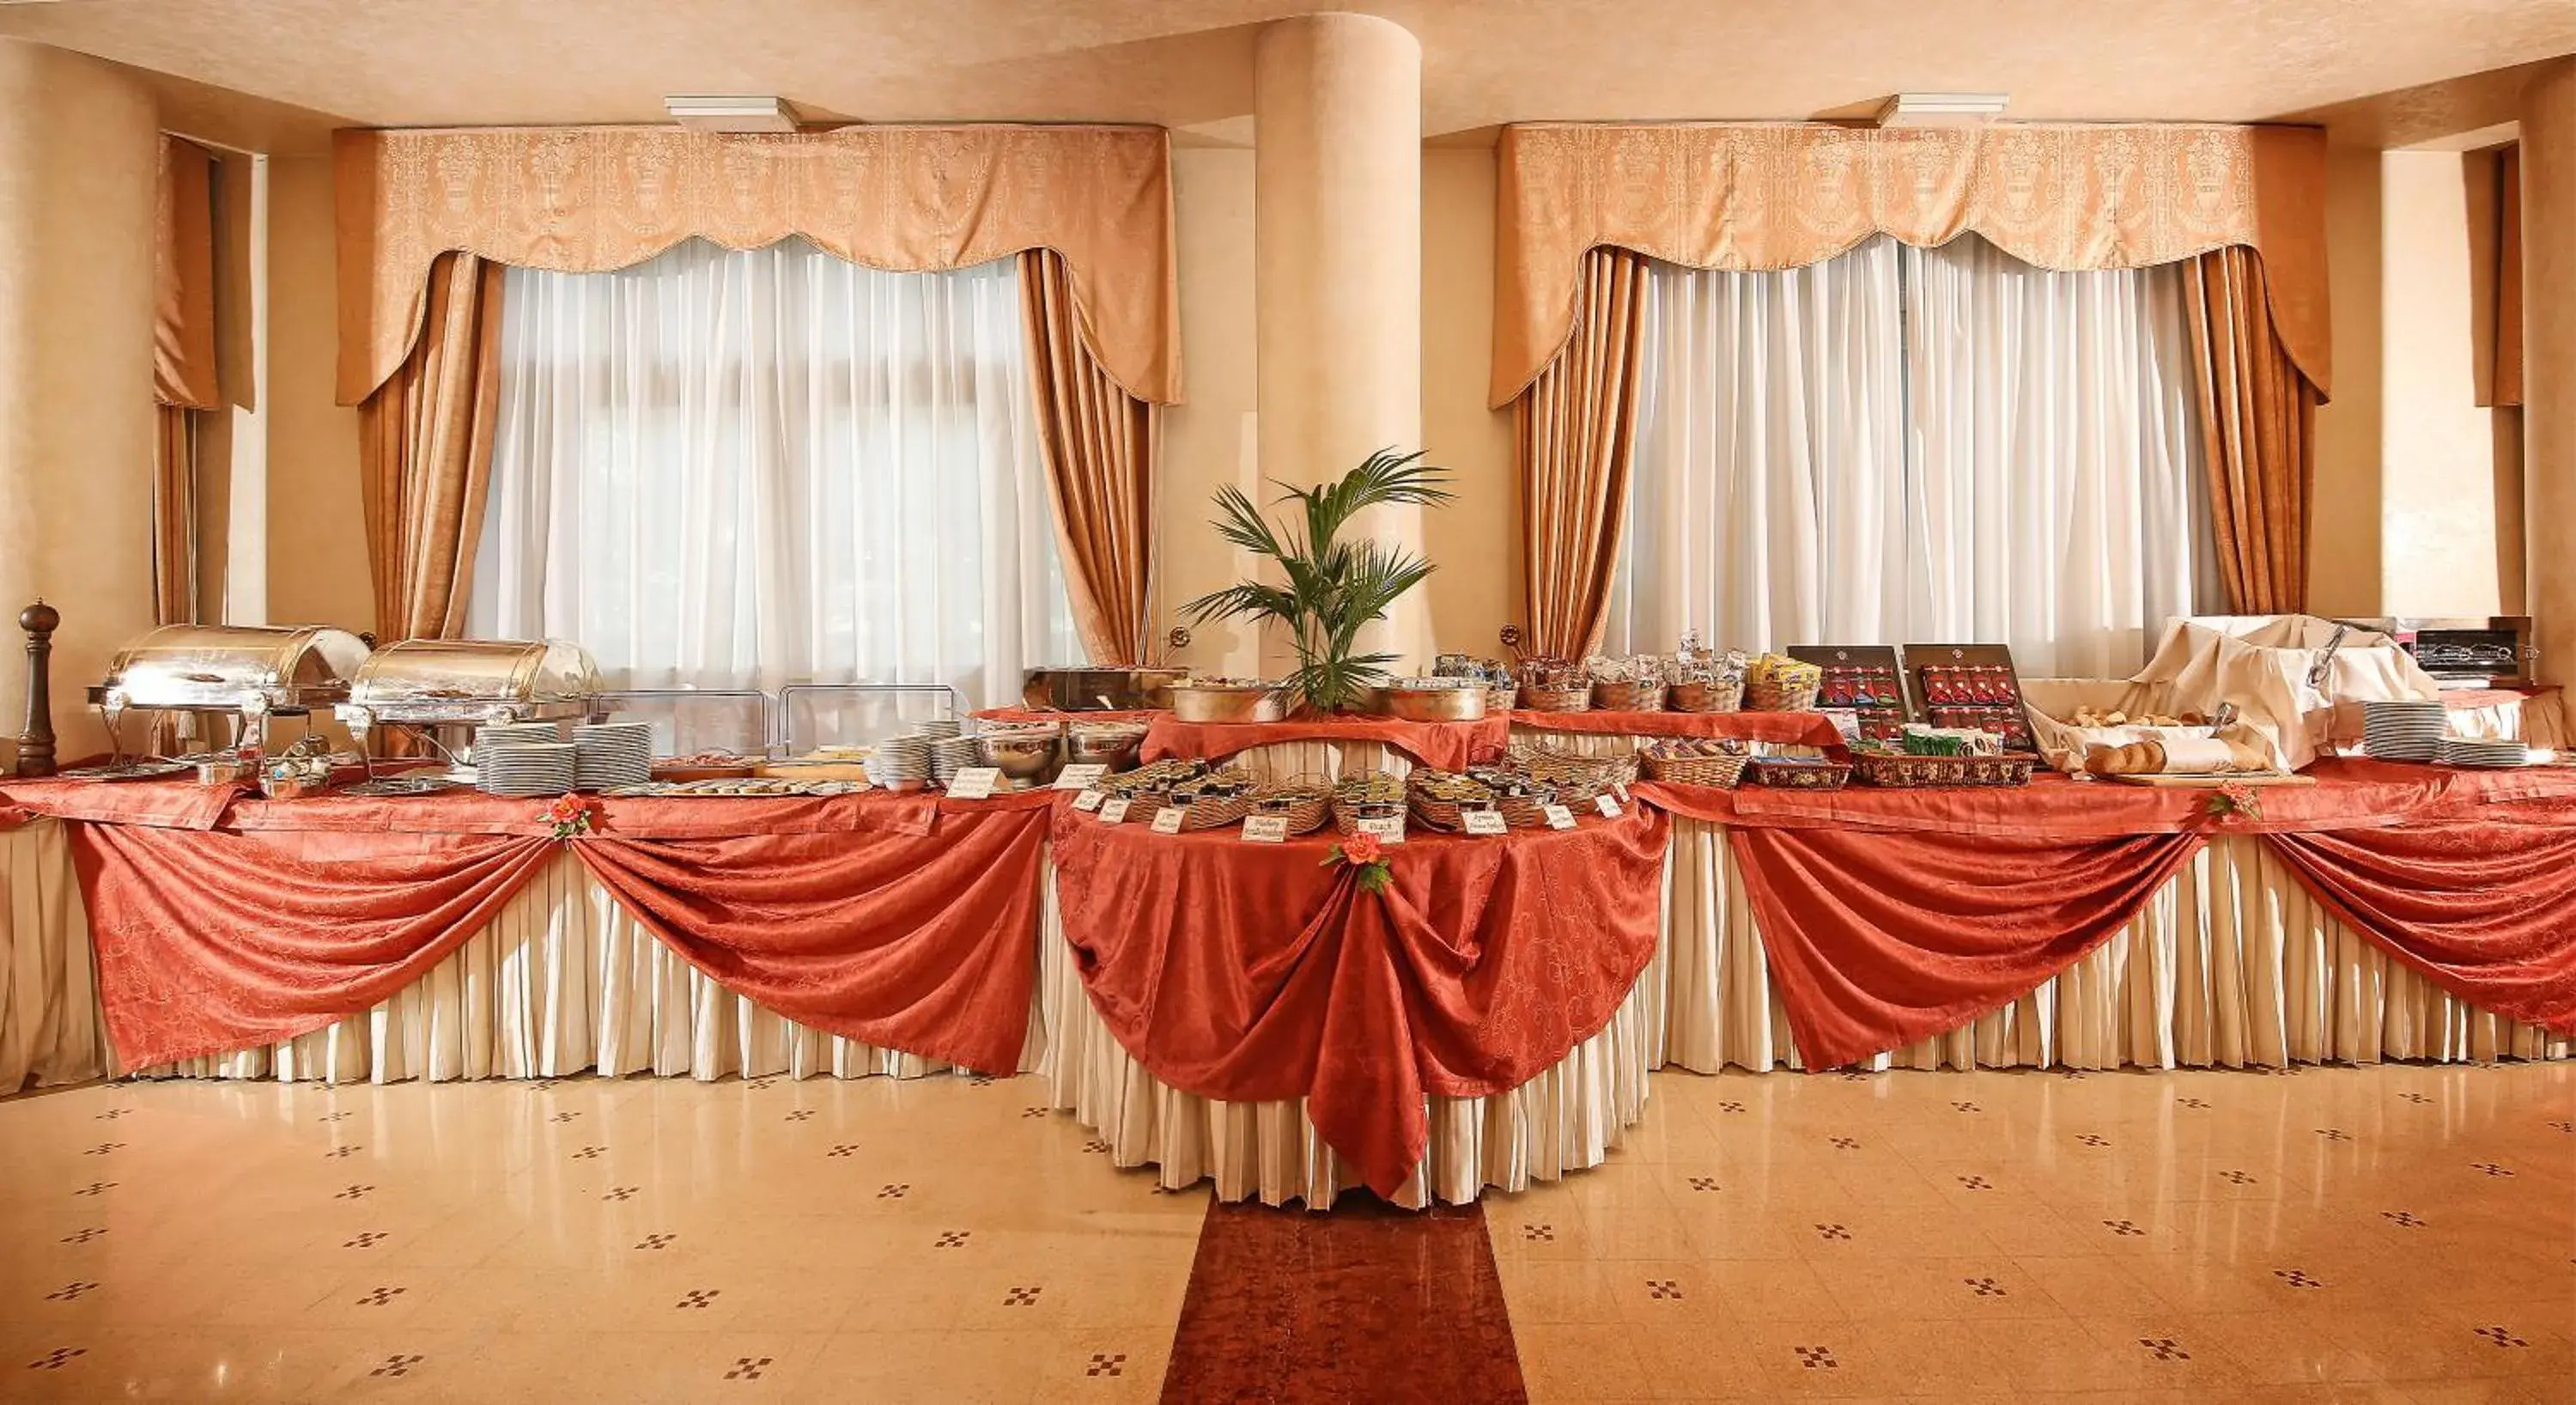 Buffet breakfast, Banquet Facilities in Hotel Savoy Palace